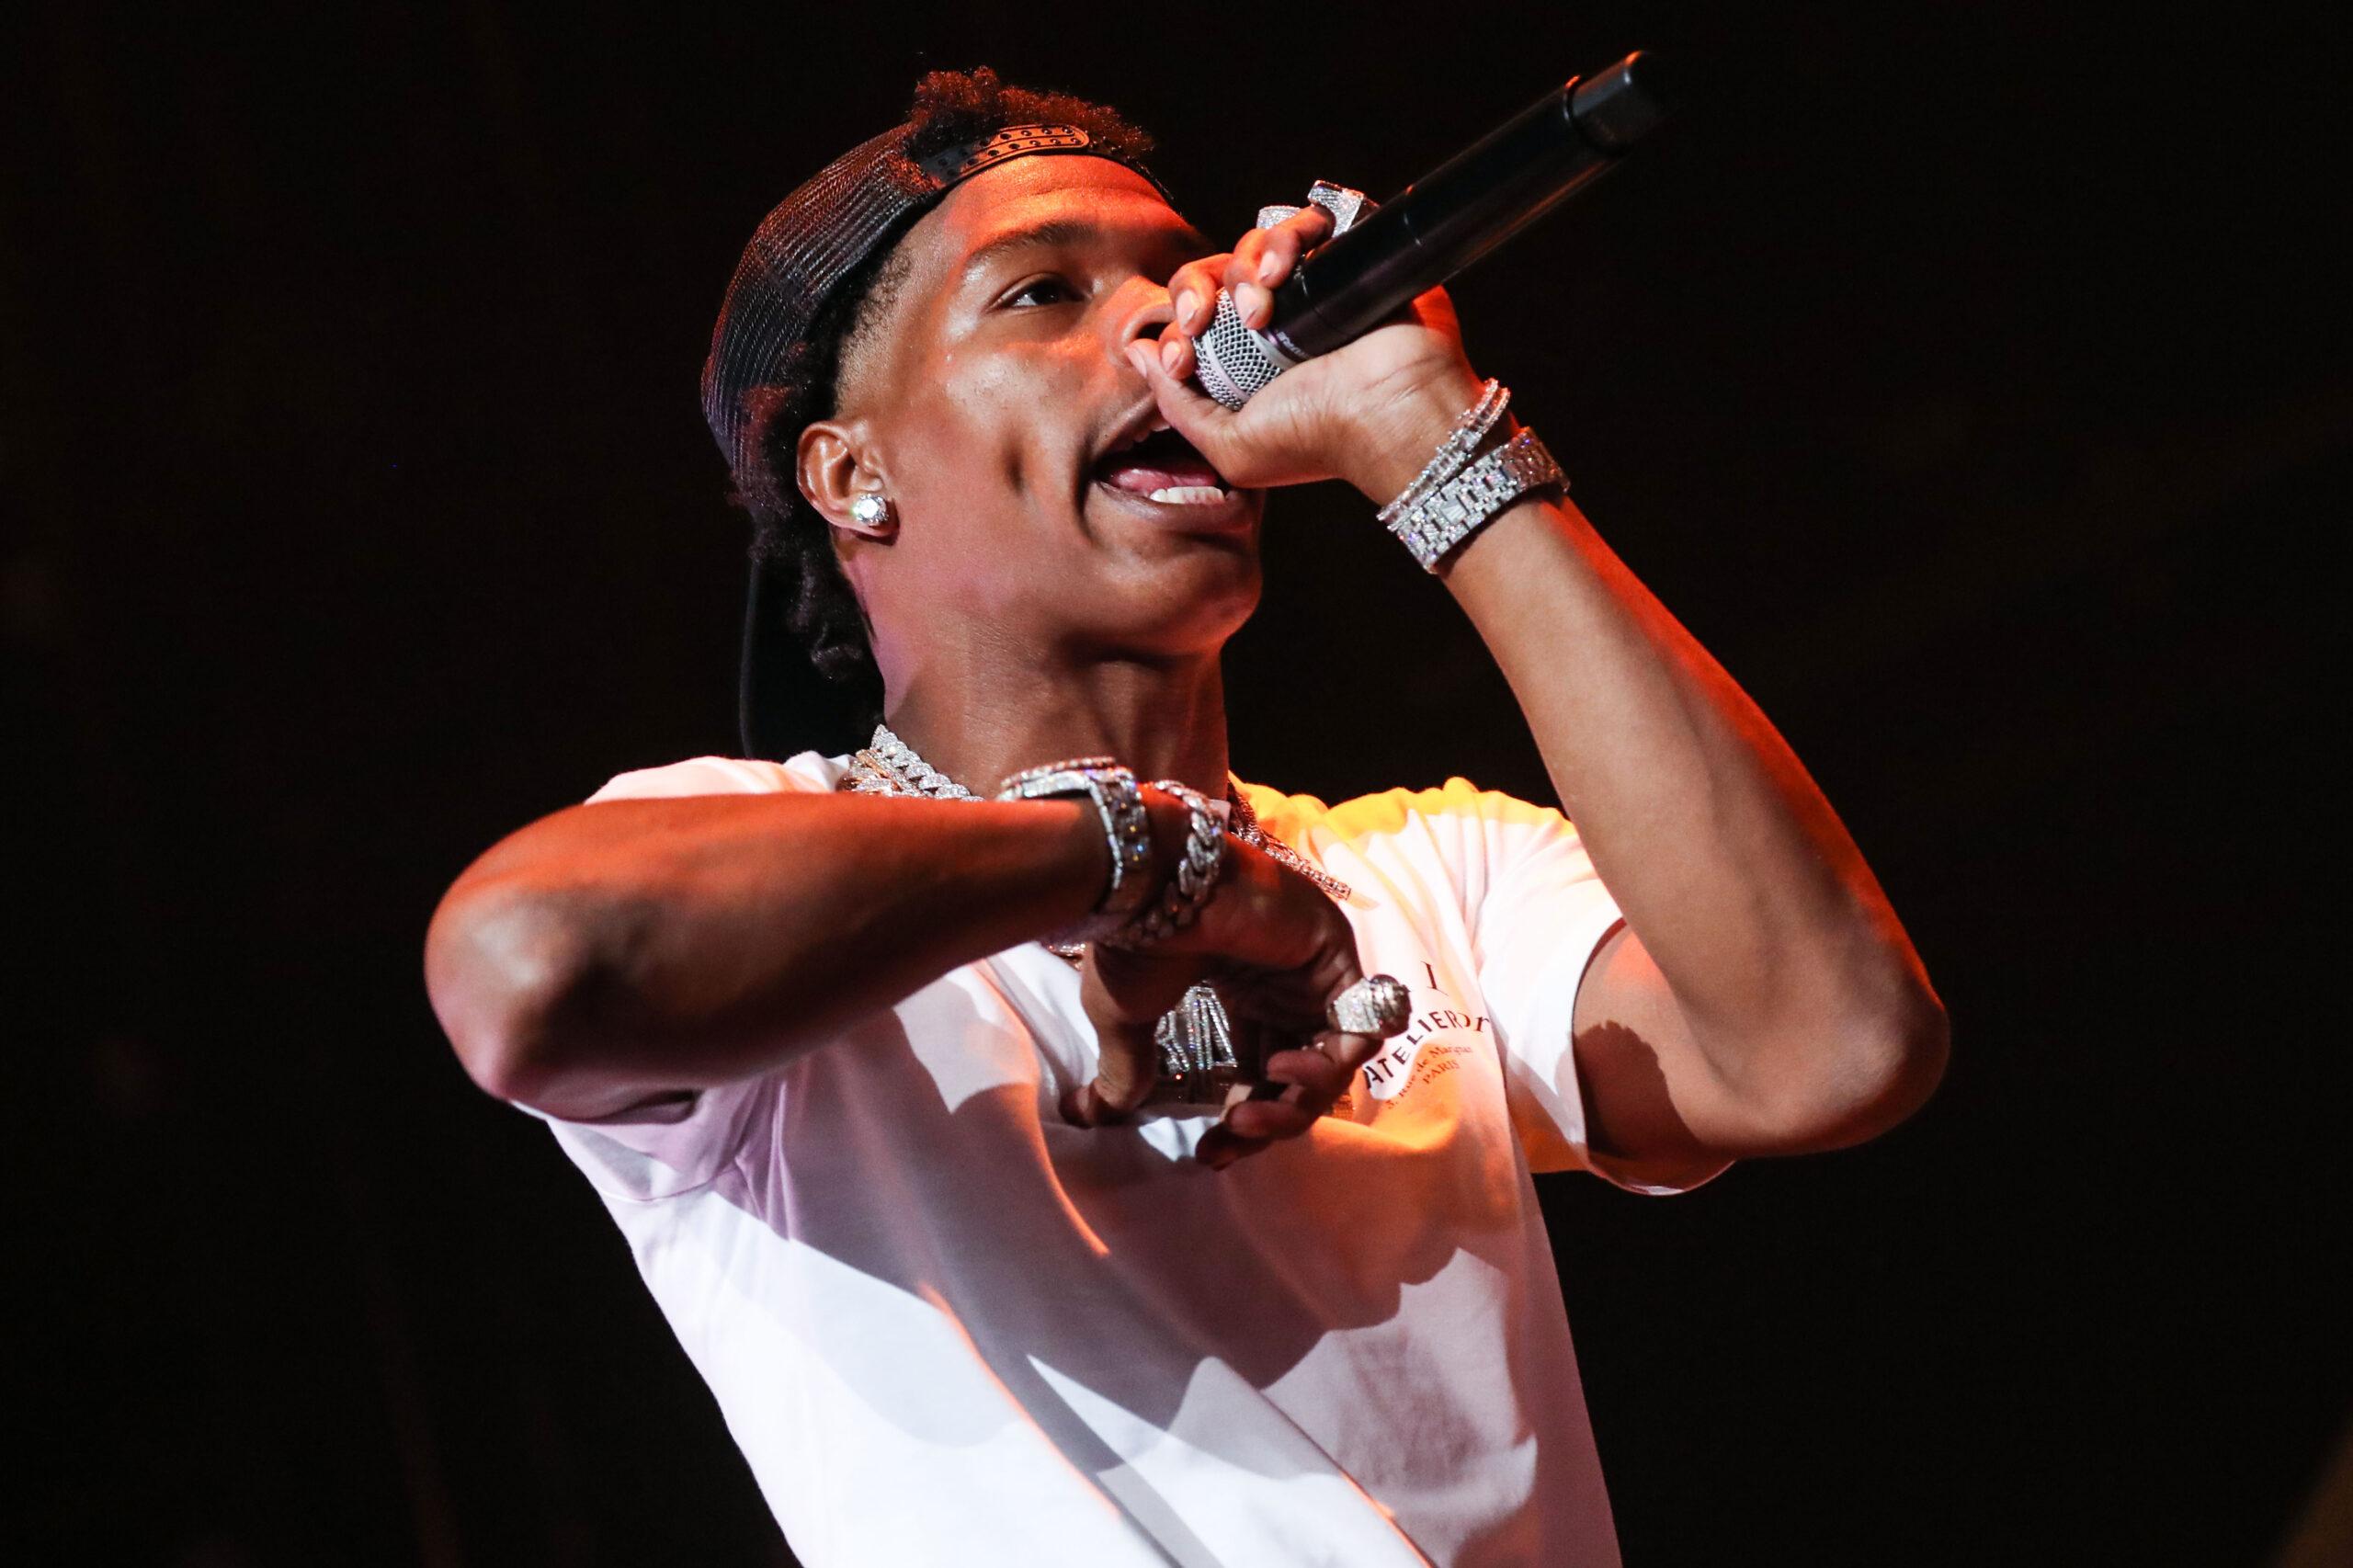 Lil Baby performs at the 7th Annual BET Experience At L.A. LIVE Presented By Coca-Cola - Day 3